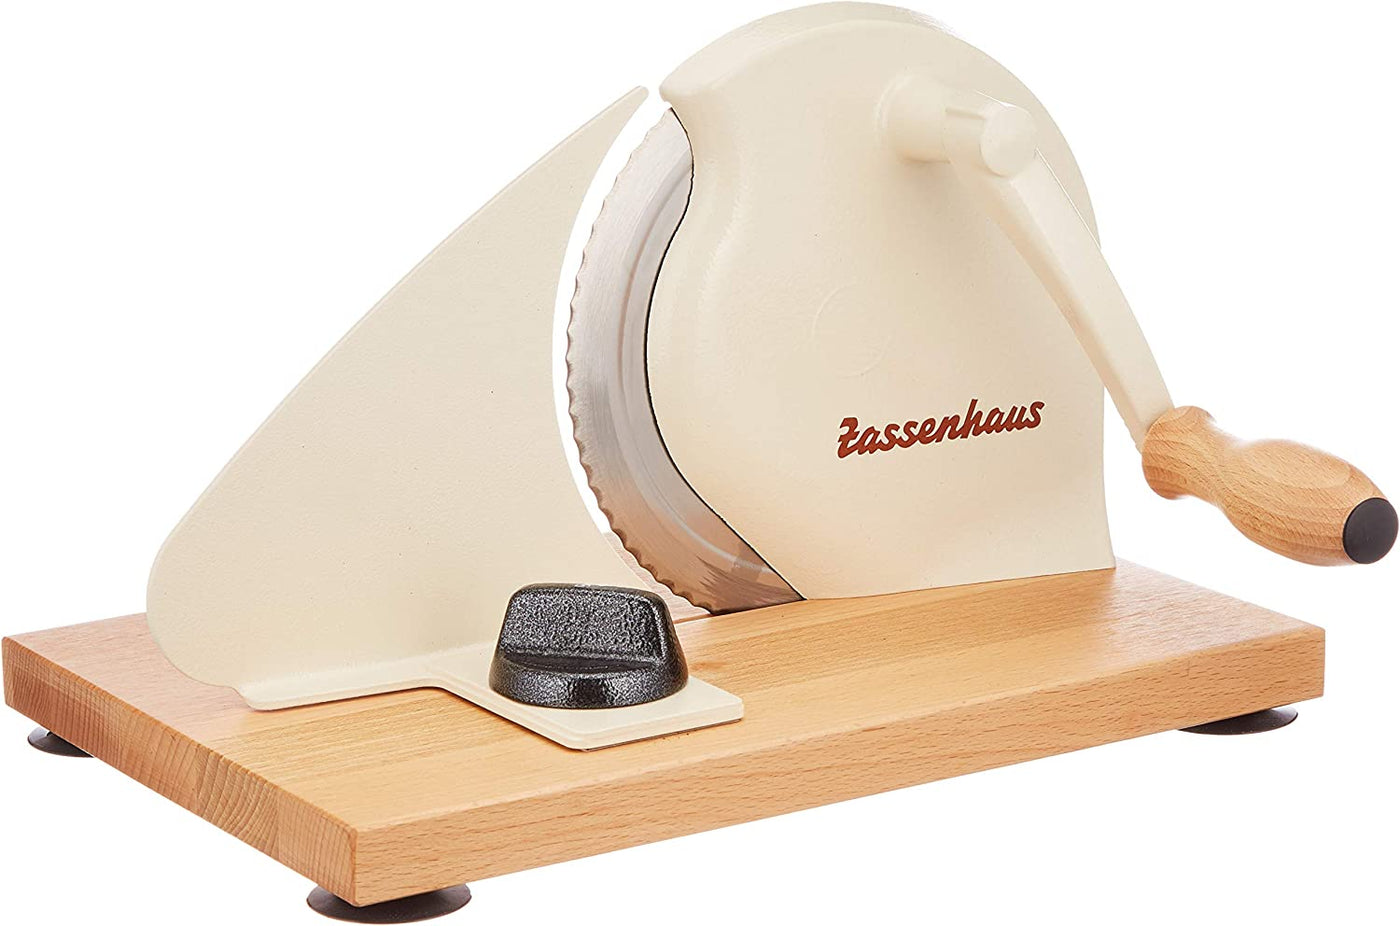 CraftKitchen Bread Slicer Knife 8 - SANE - Sewing and Housewares